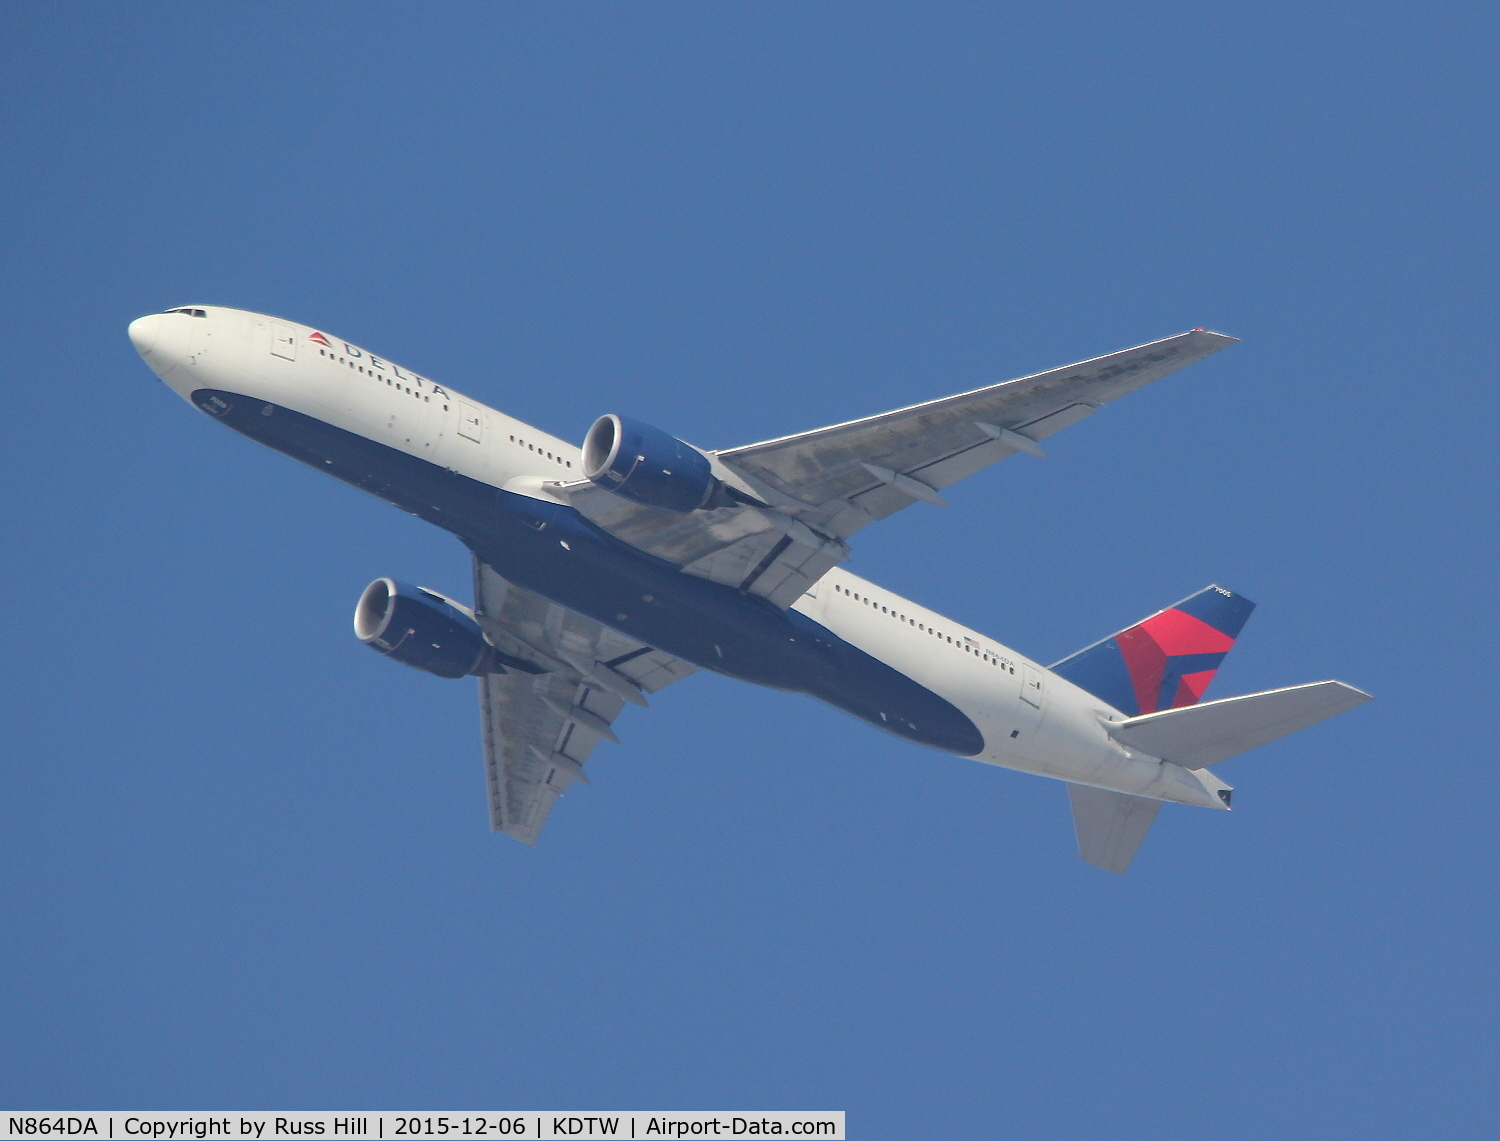 N864DA, 1999 Boeing 777-232 C/N 29736, DL582, PVG to DTW.  On approach to DTW approx. 15 miles out.